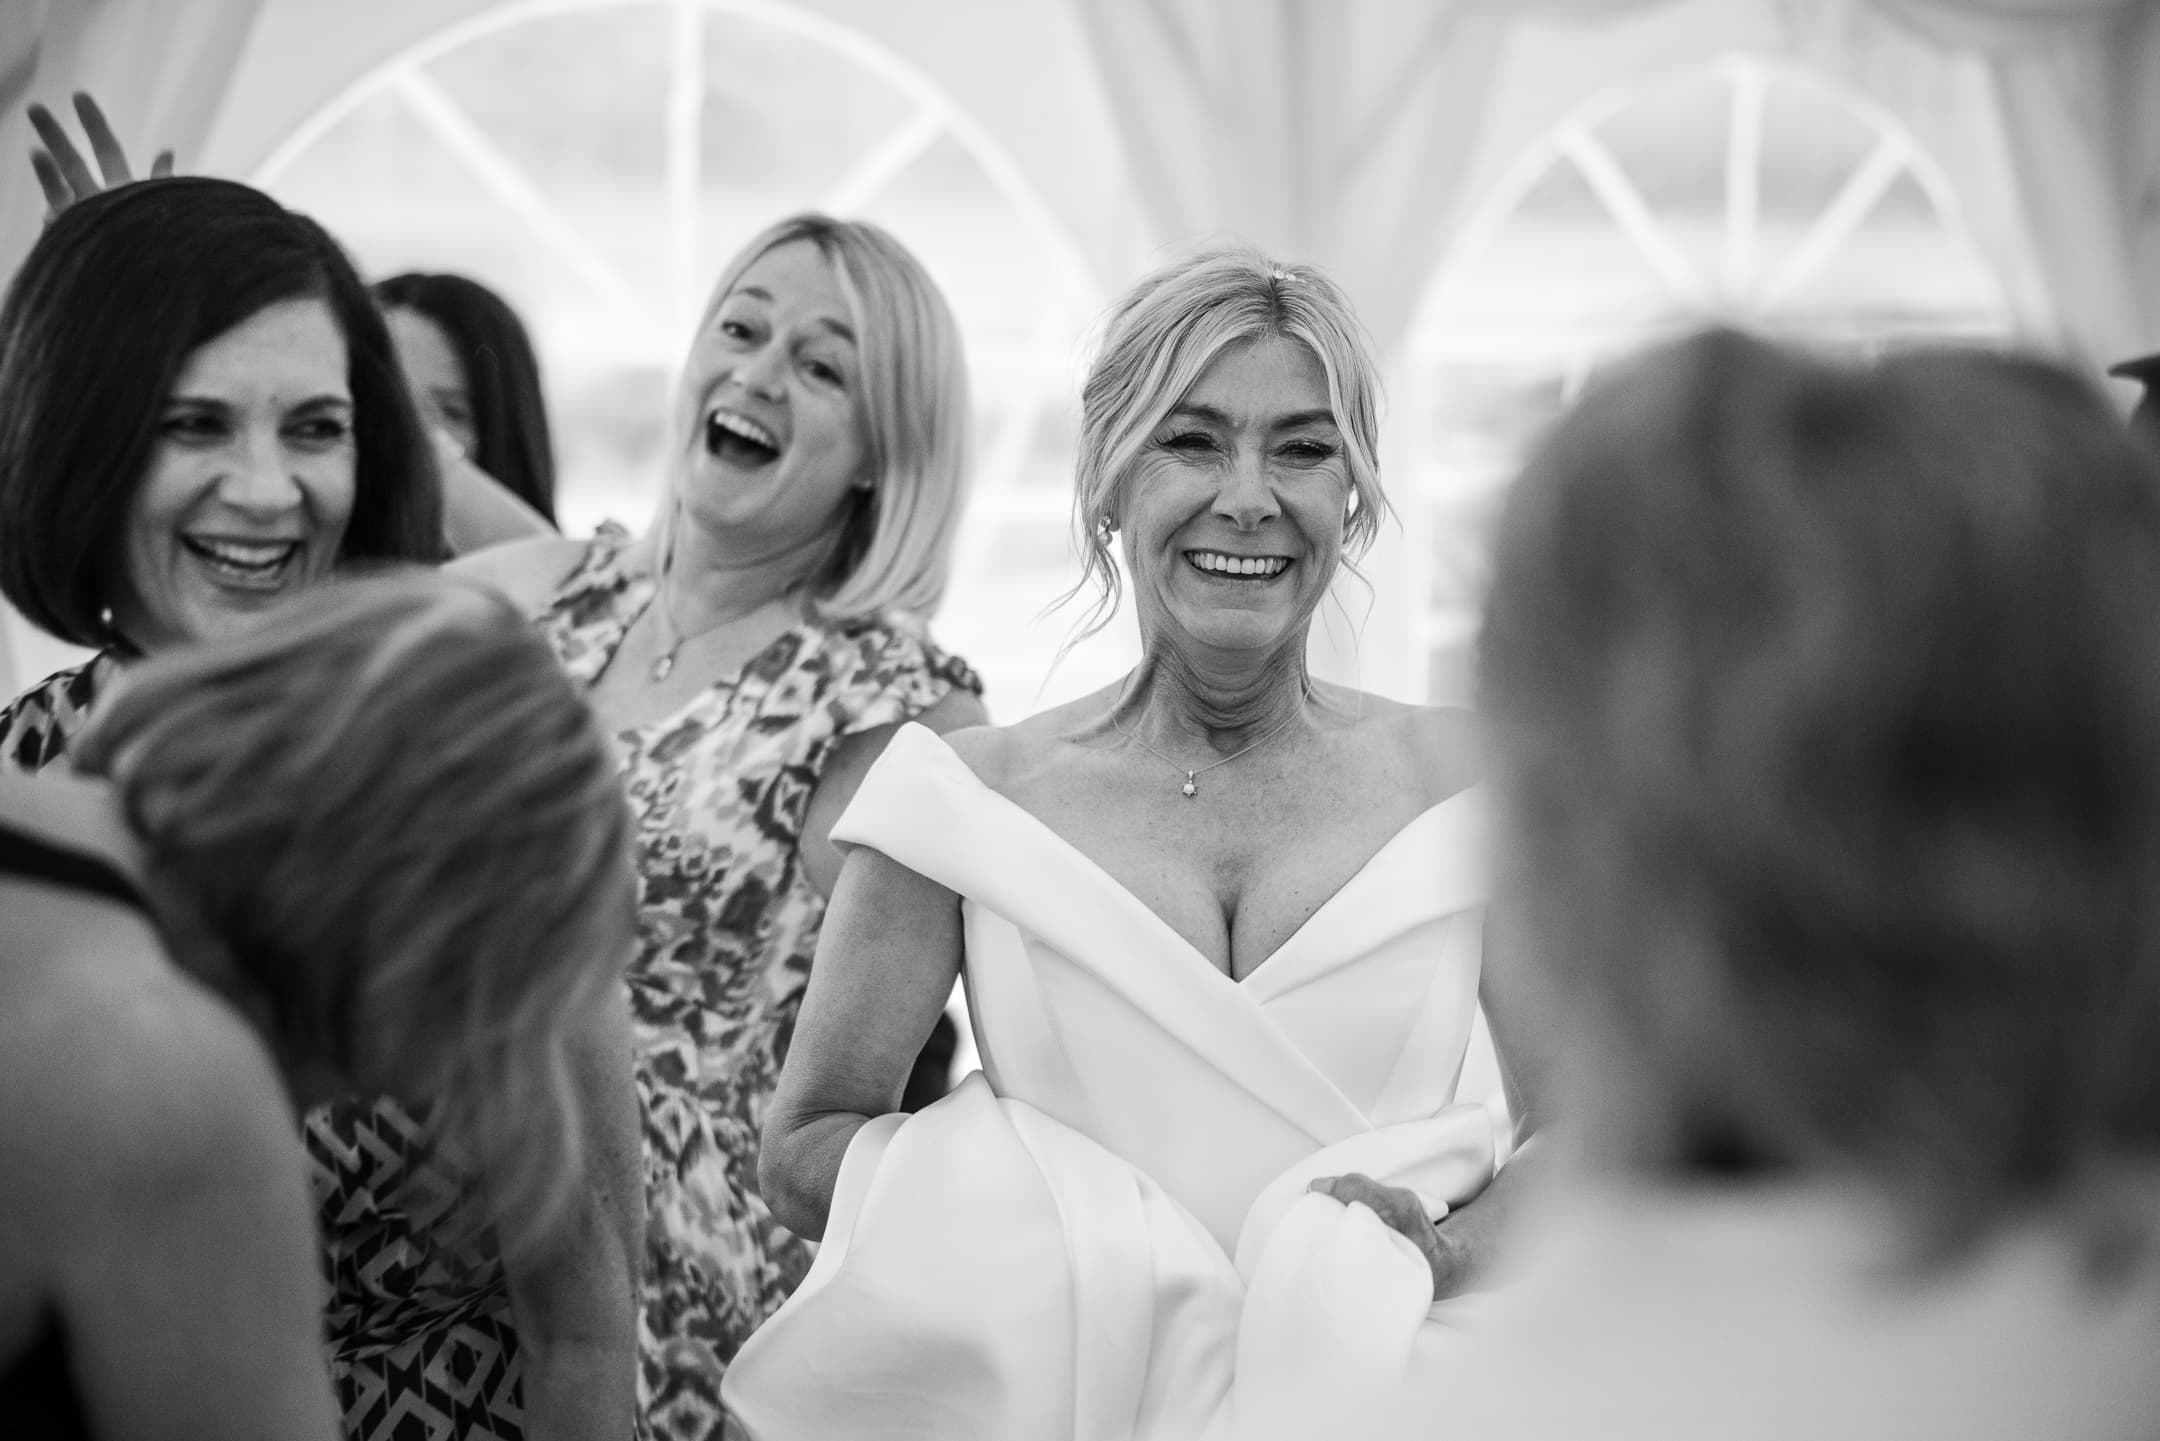 Bride laughing with friends at the wedding